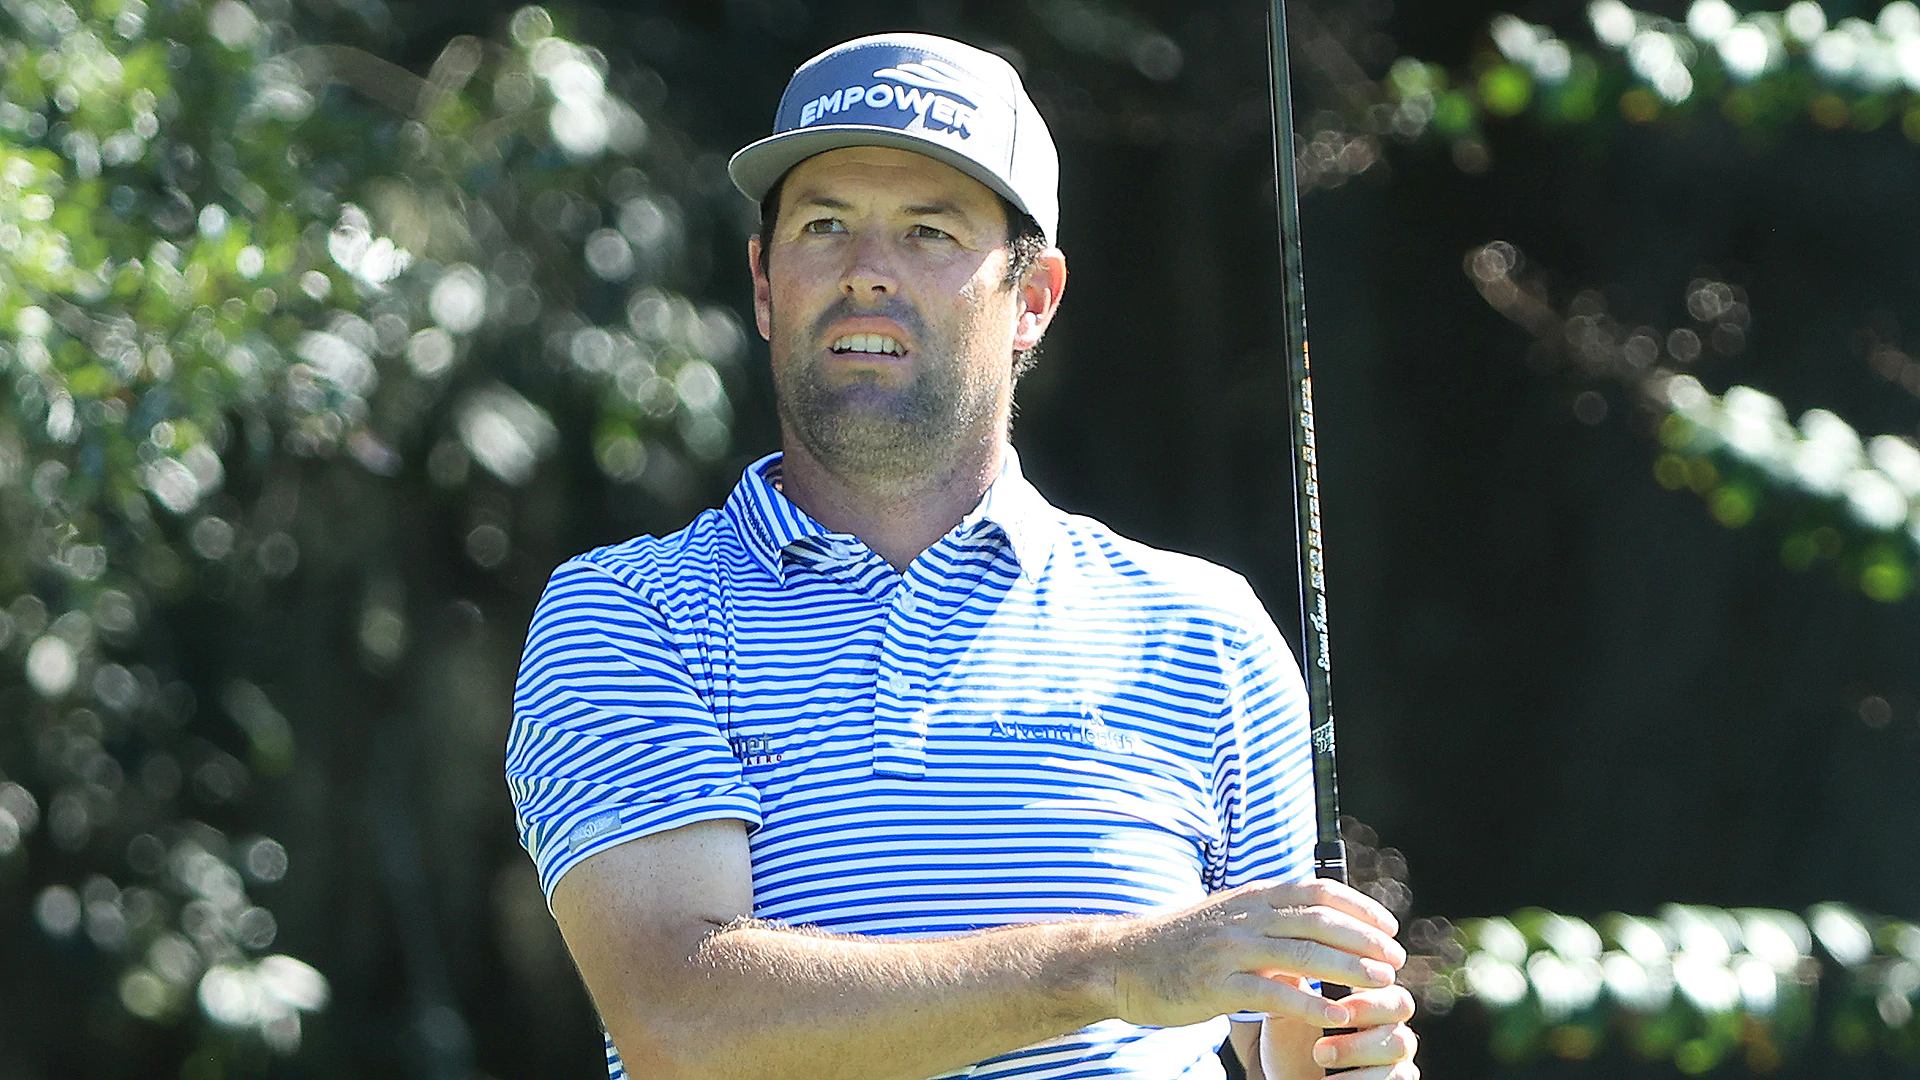 Past champ Robert Streb fires 63 to grab two-stroke lead at RSM Classic